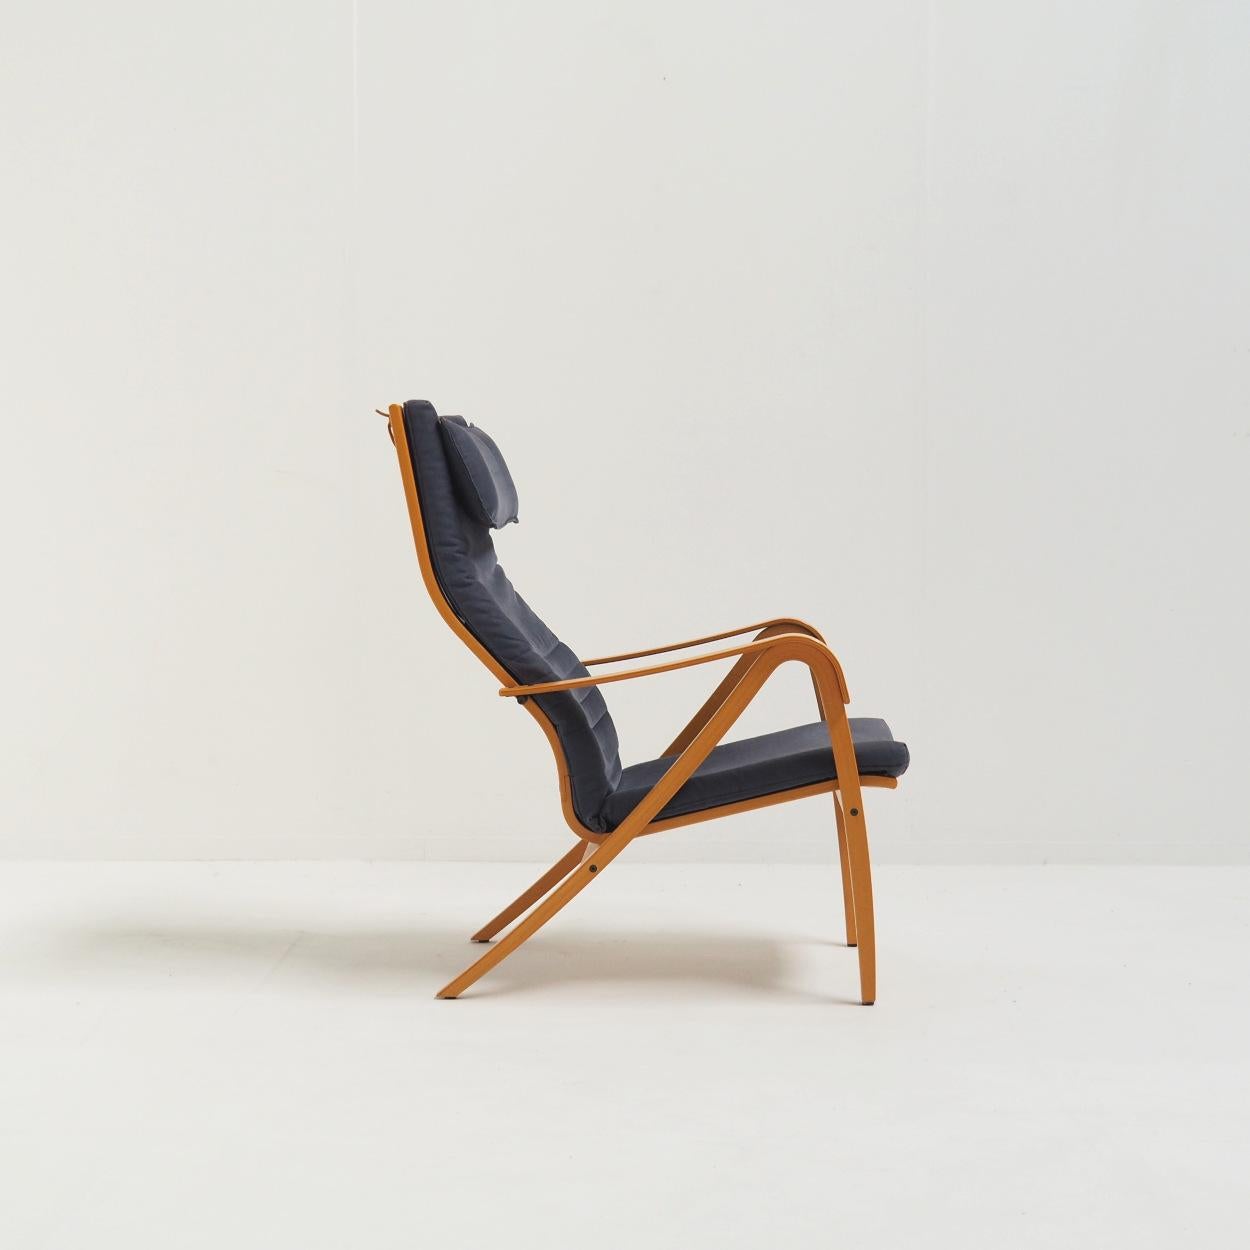 Simo Heikillä, winner of many design prices, designed this beautiful easy chair for IKEA in the 1990s.

As you can see, a lot of effort has been done to realise it. All the bended wood, the beautiful finish of joints, this all is not the easy way to